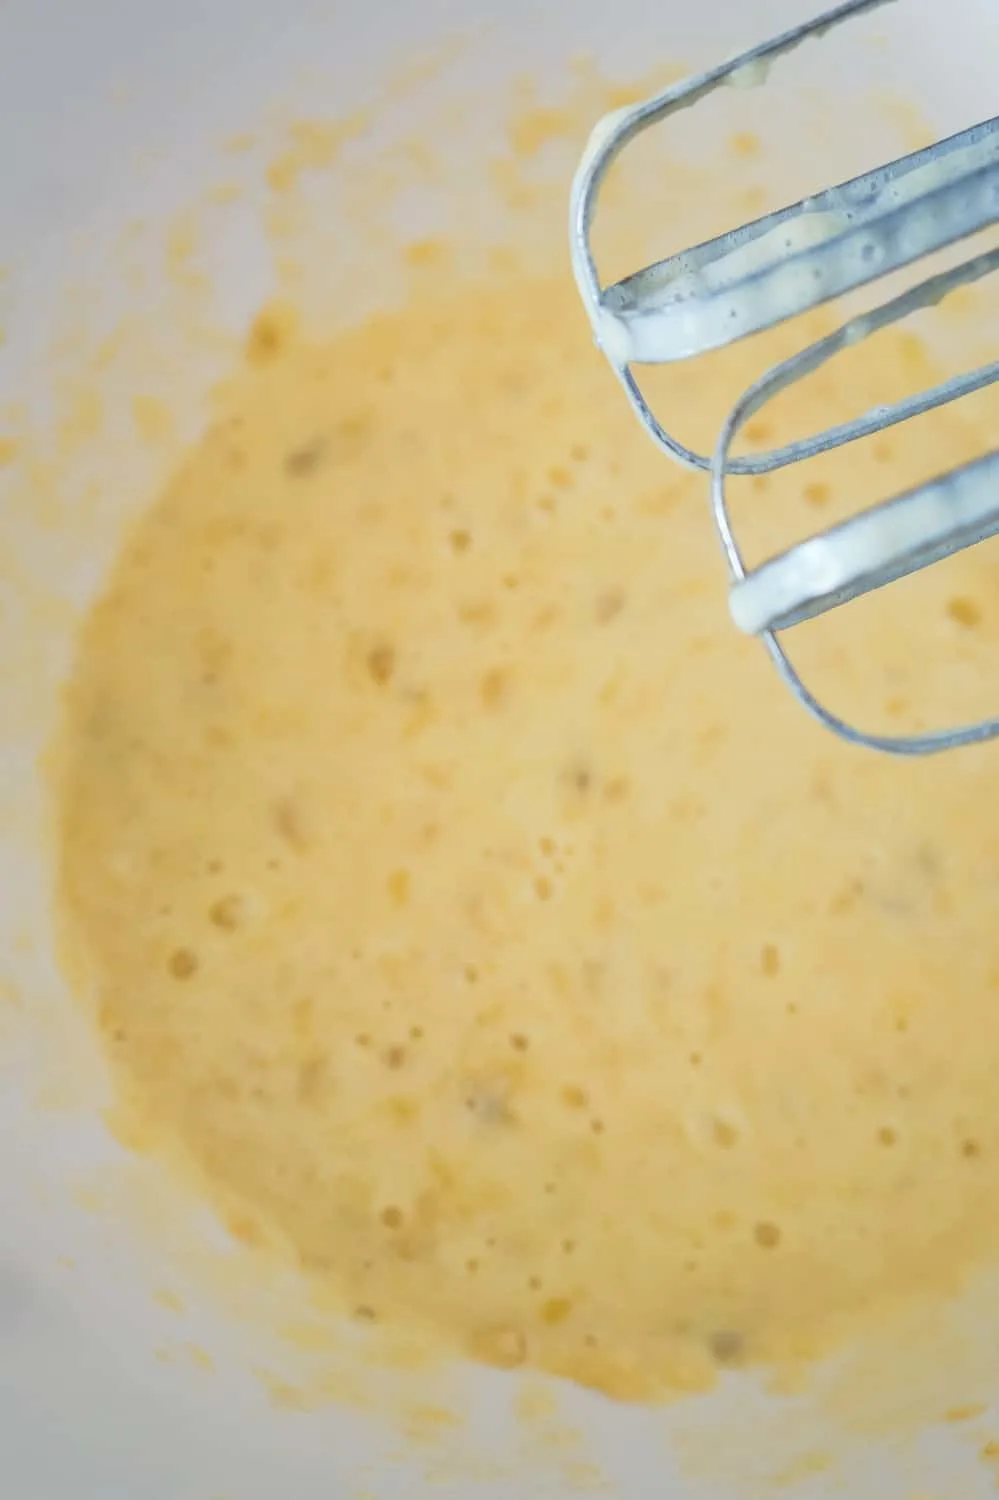 eggs and ripe bananas beaten together with electric mixer